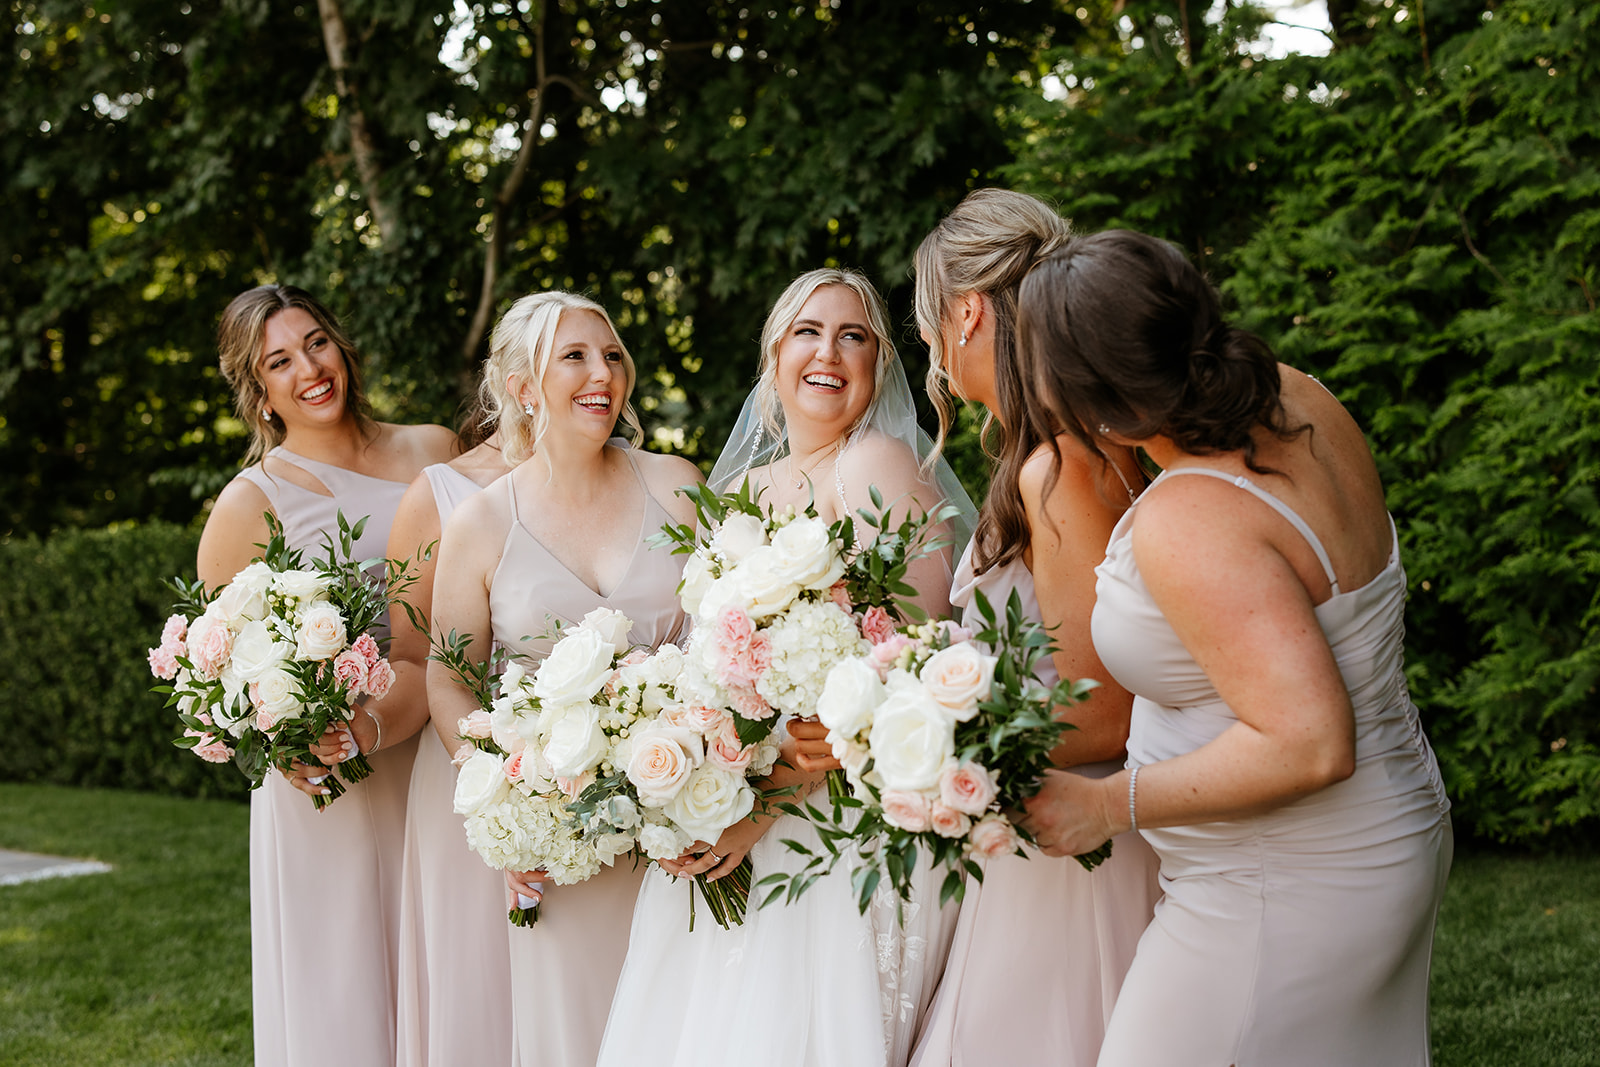 Bridesmaids coordinating dresses pose with a bride, holding bouquets against a backdrop of greenery at Lakeview Pavilion